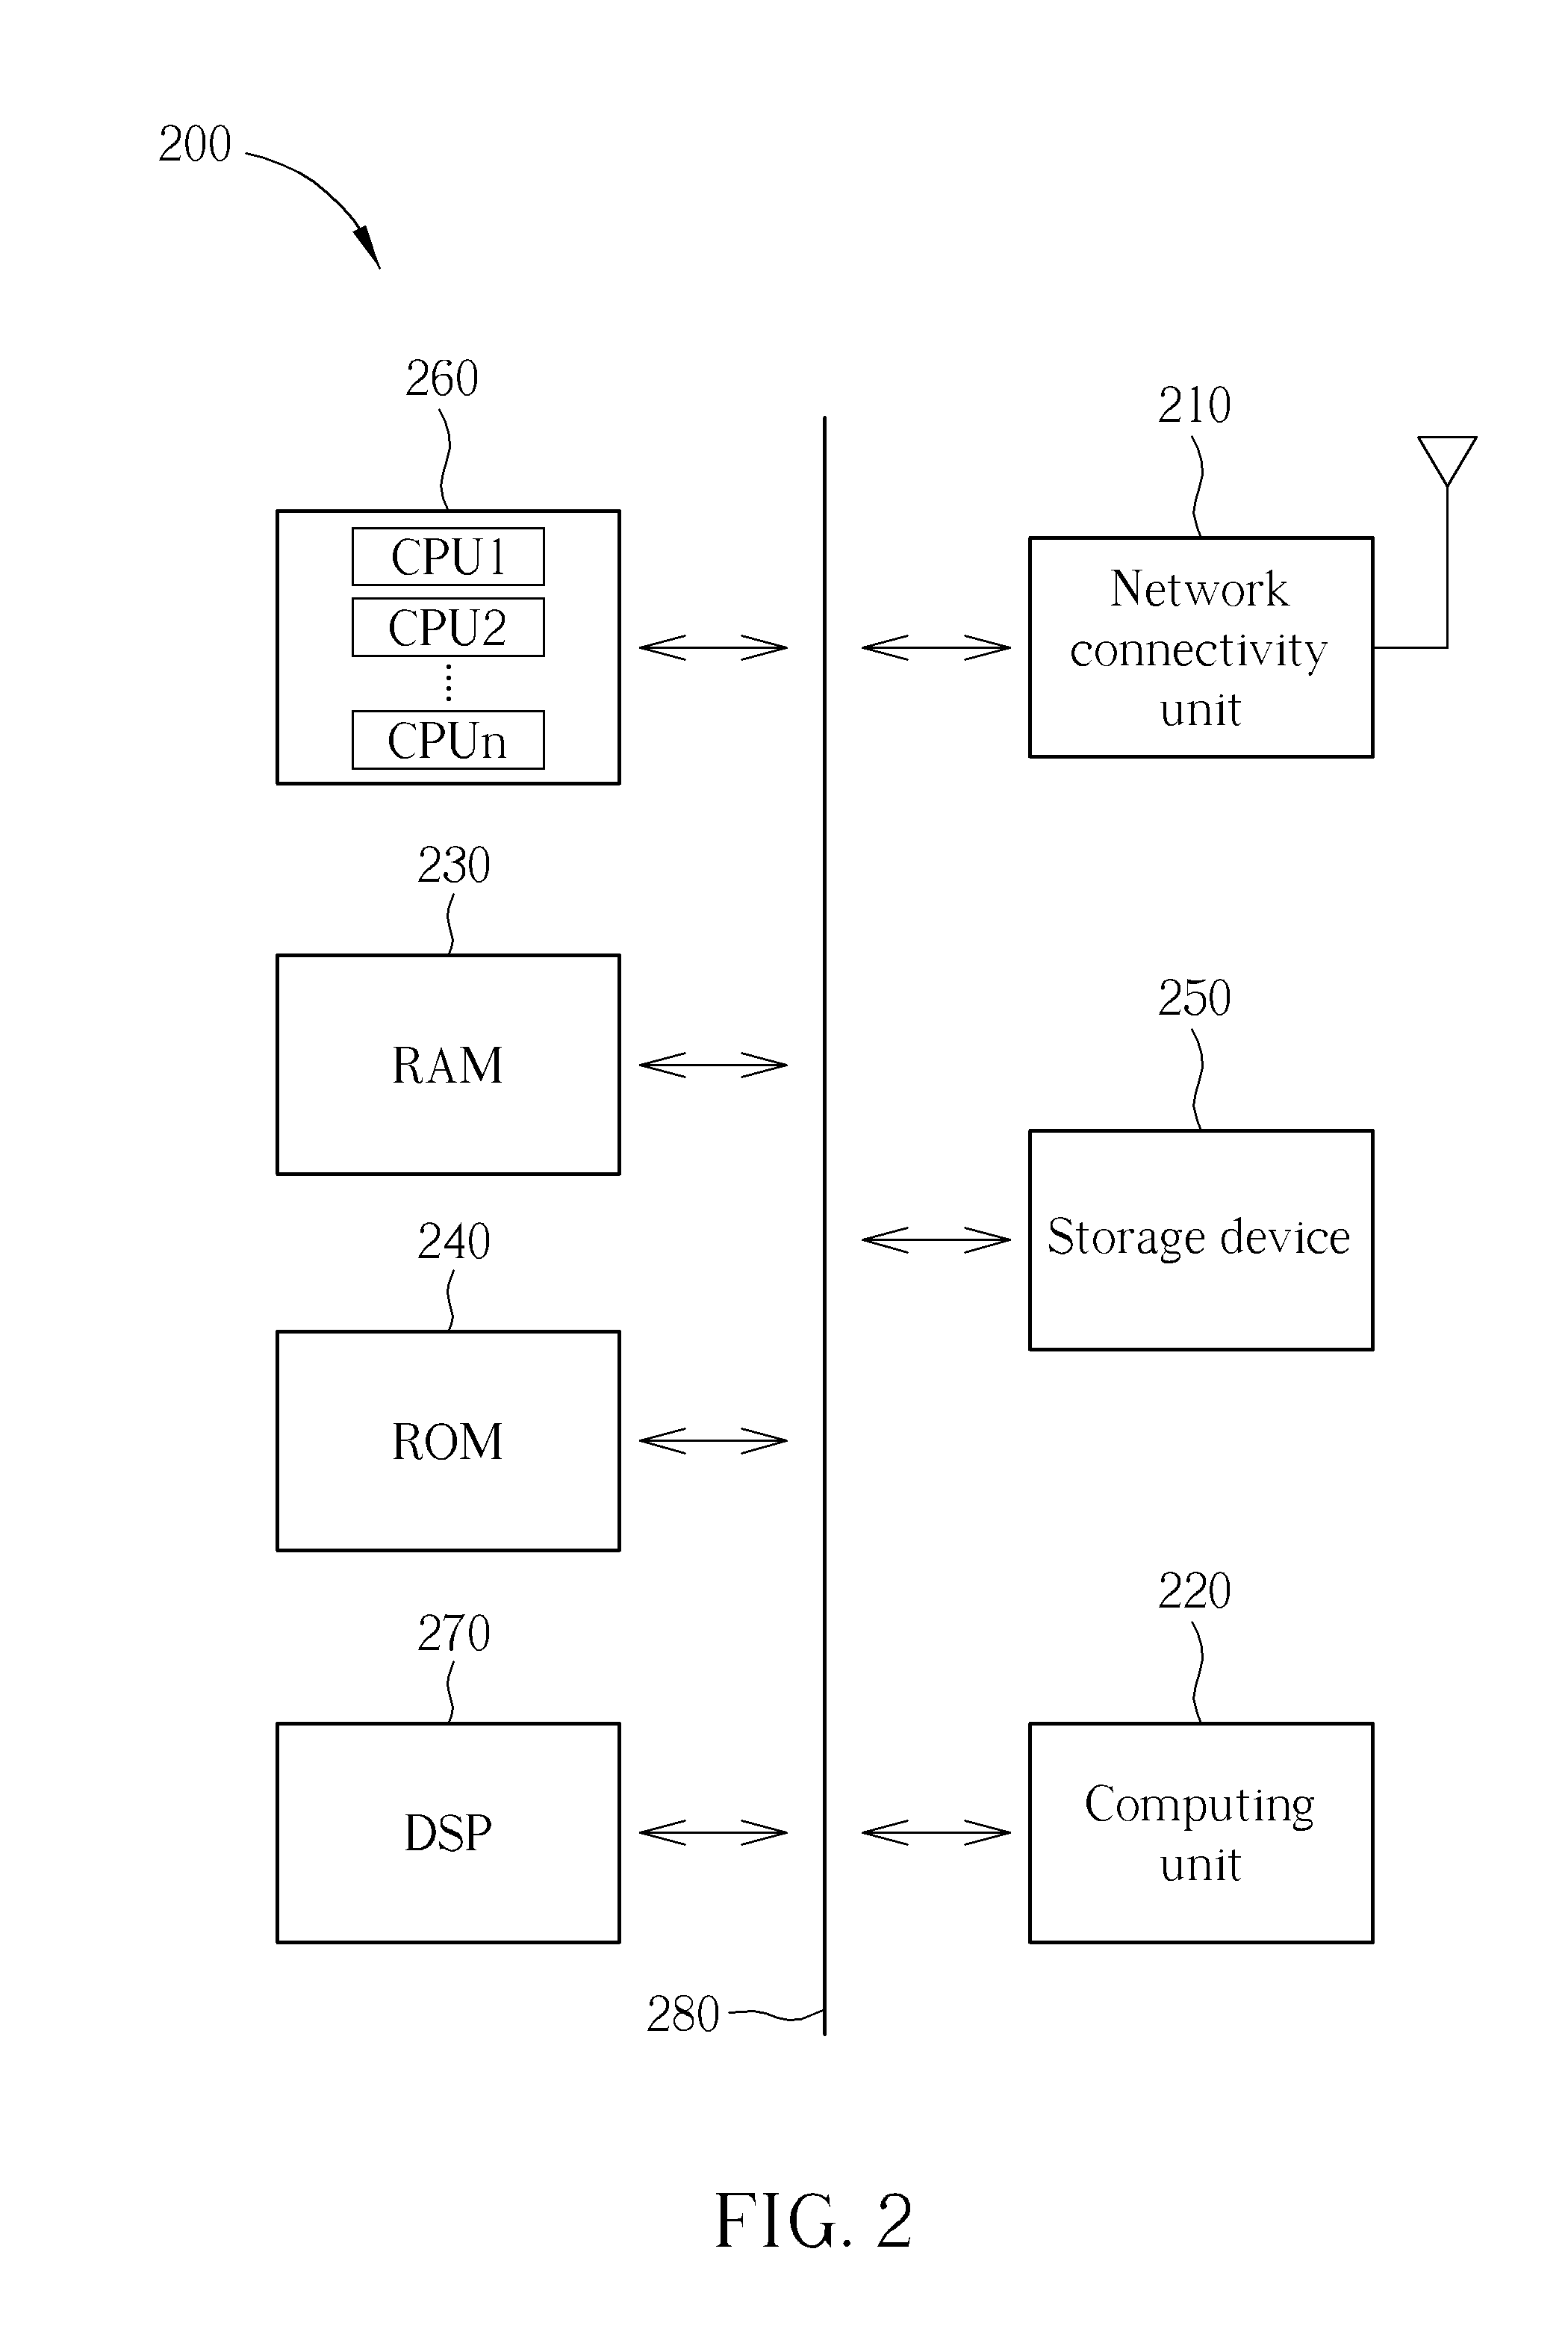 Method of managing e-utra function of user equipment and related wireless communication system